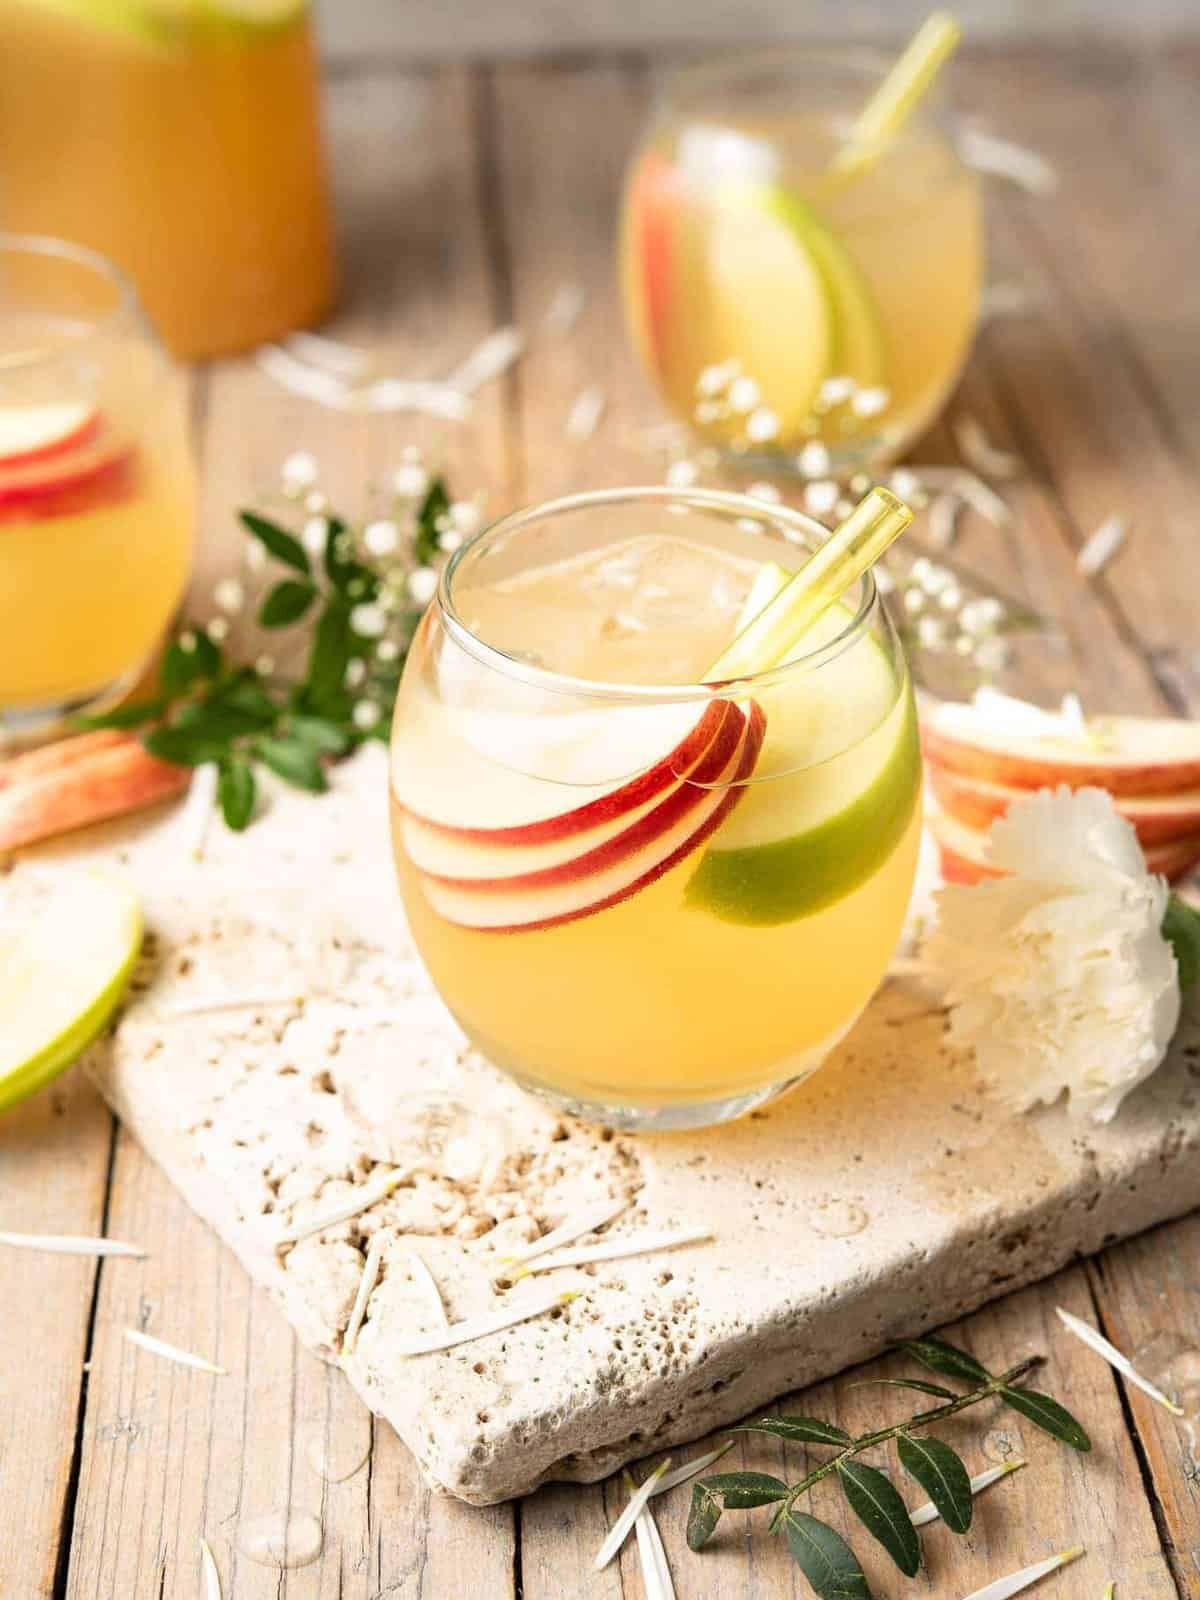 An apple pie-inspired drink, consisting of a pitcher of apple sangria garnished with slices of apples.